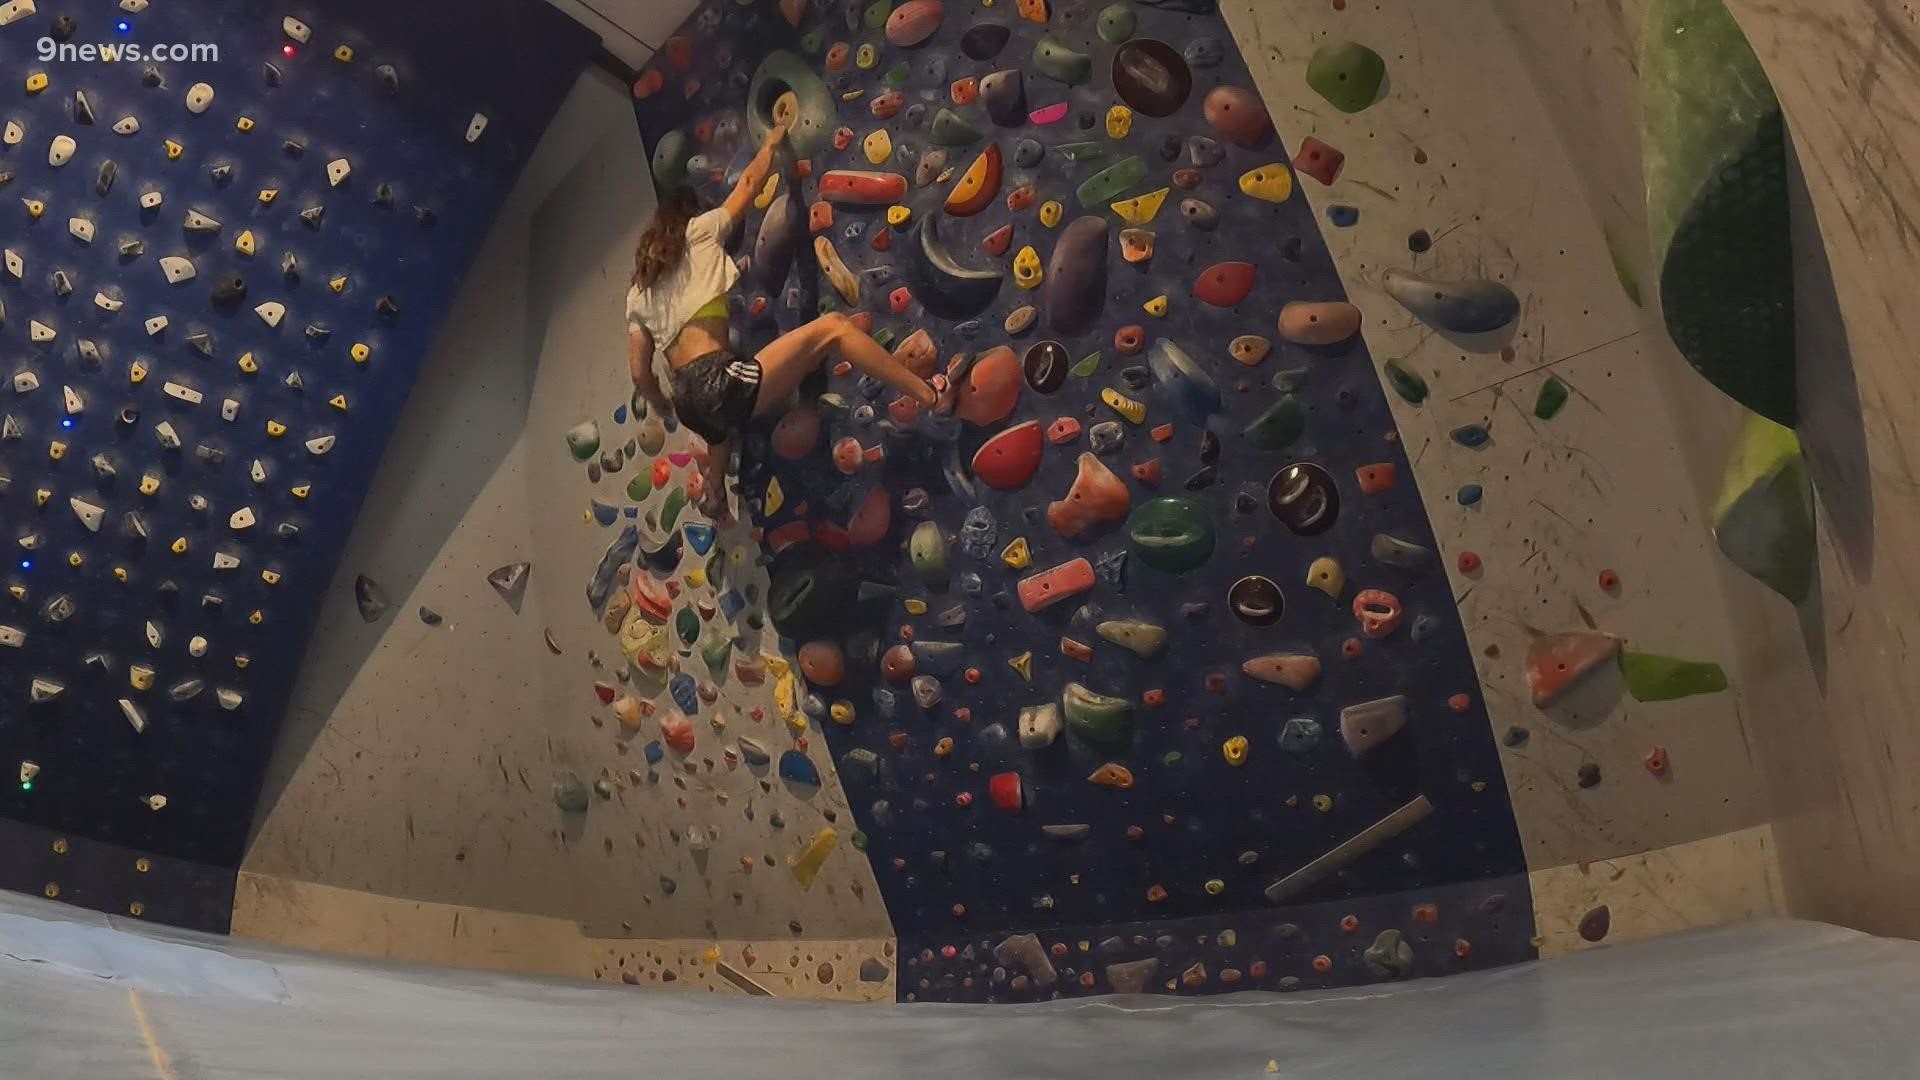 Brooke Raboutou has been climbing since she was 2-years-old. Now she’s a world class climber, just like her parents.